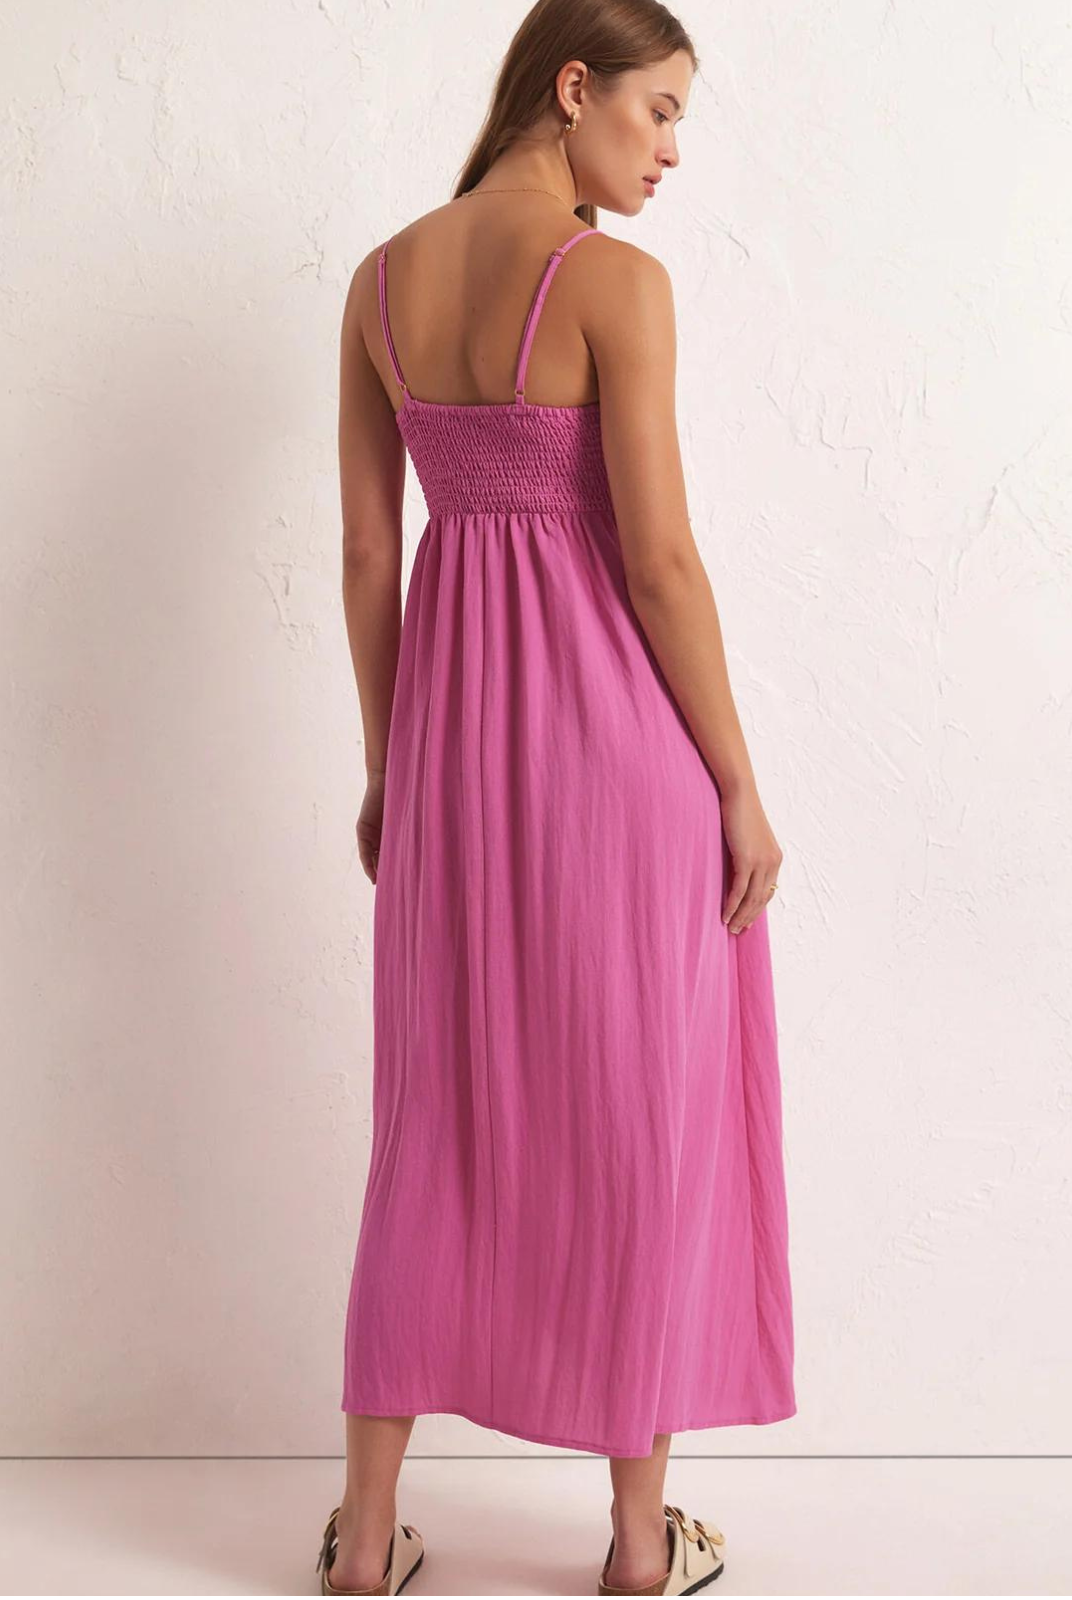 Z Supply Beachside Midi Dress - Heartbreaker Pink Vacation is calling!  The most perfect midi dress that is fit for the tropics.  Comfy, cute and flattering, it features: Fitted, Smocked Bodice Adjustable Straps Full Skirt Lined Regular Fit 90% Rayon 10% Nylon Style #ZD231223 Fits True to Size